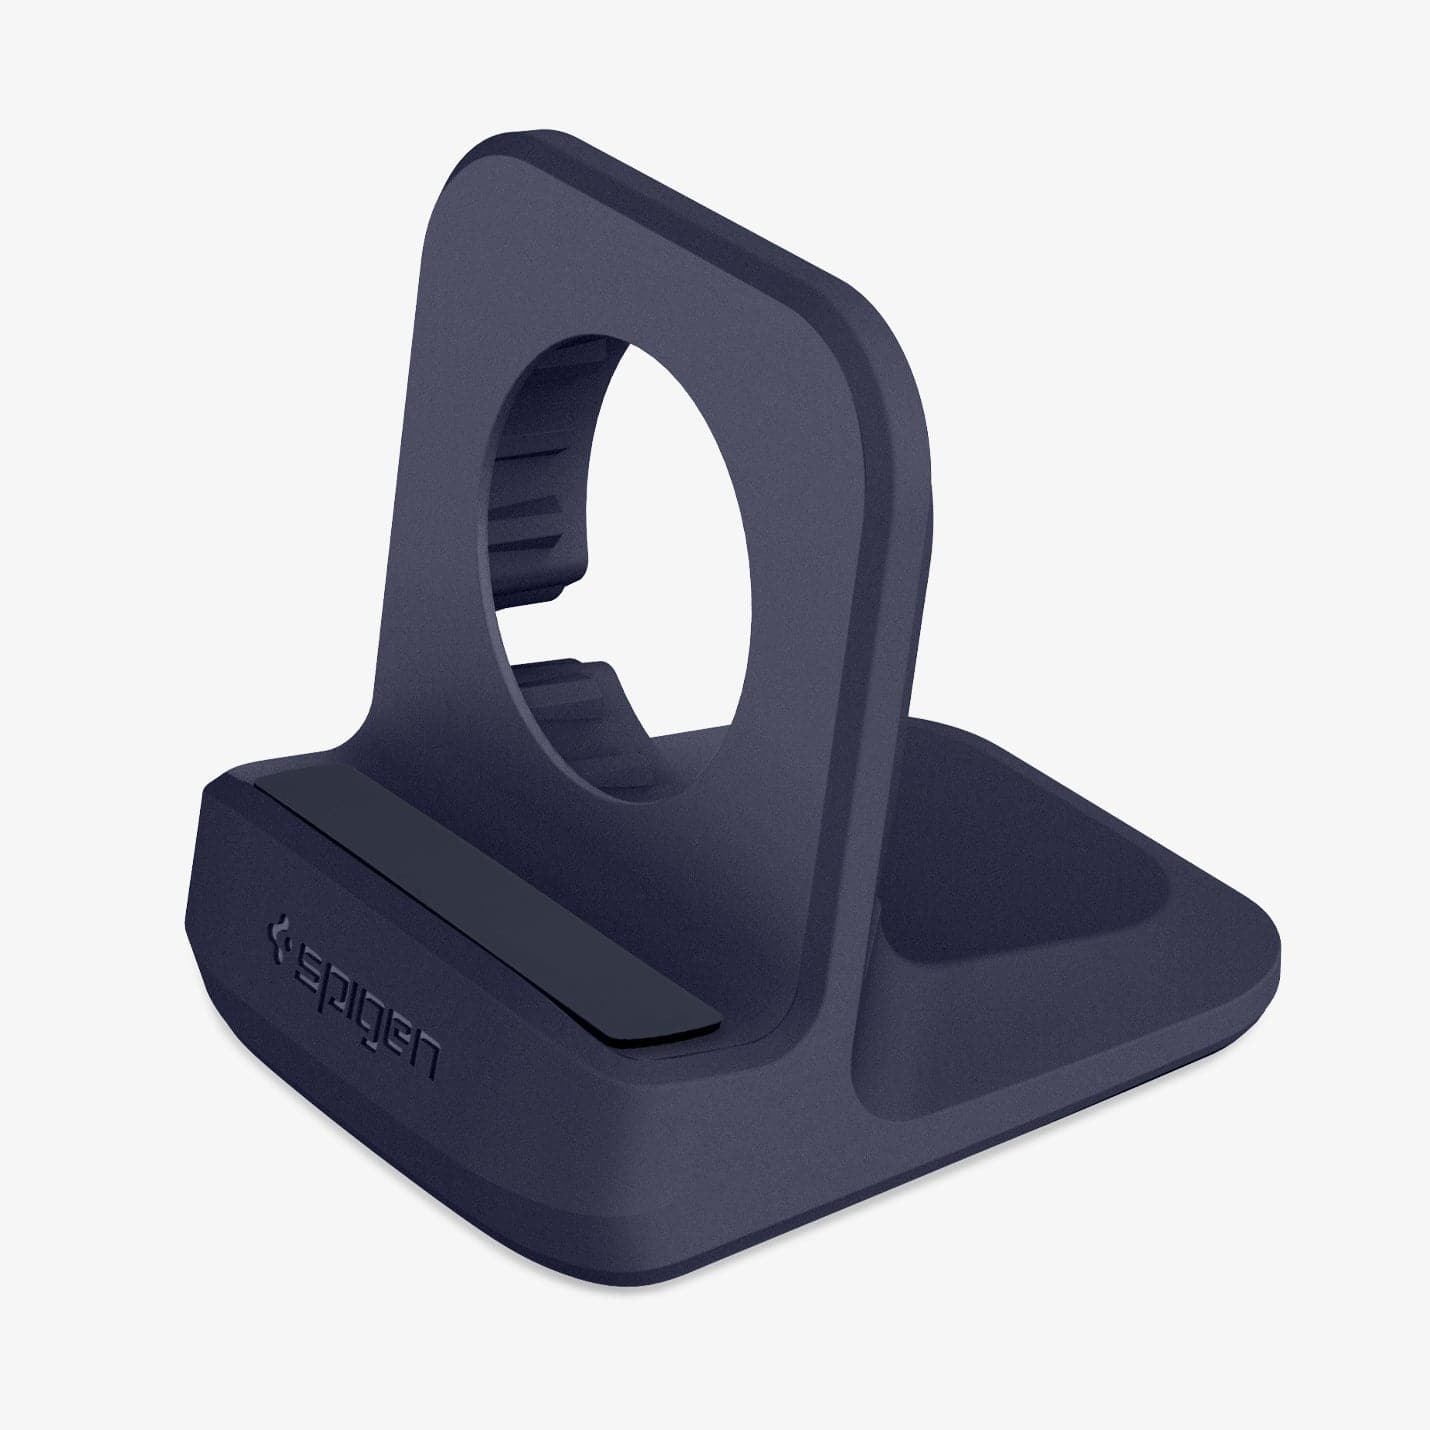 000CD21182 - Apple Watch Night Stand S350 in midnight blue showing the front, side and top